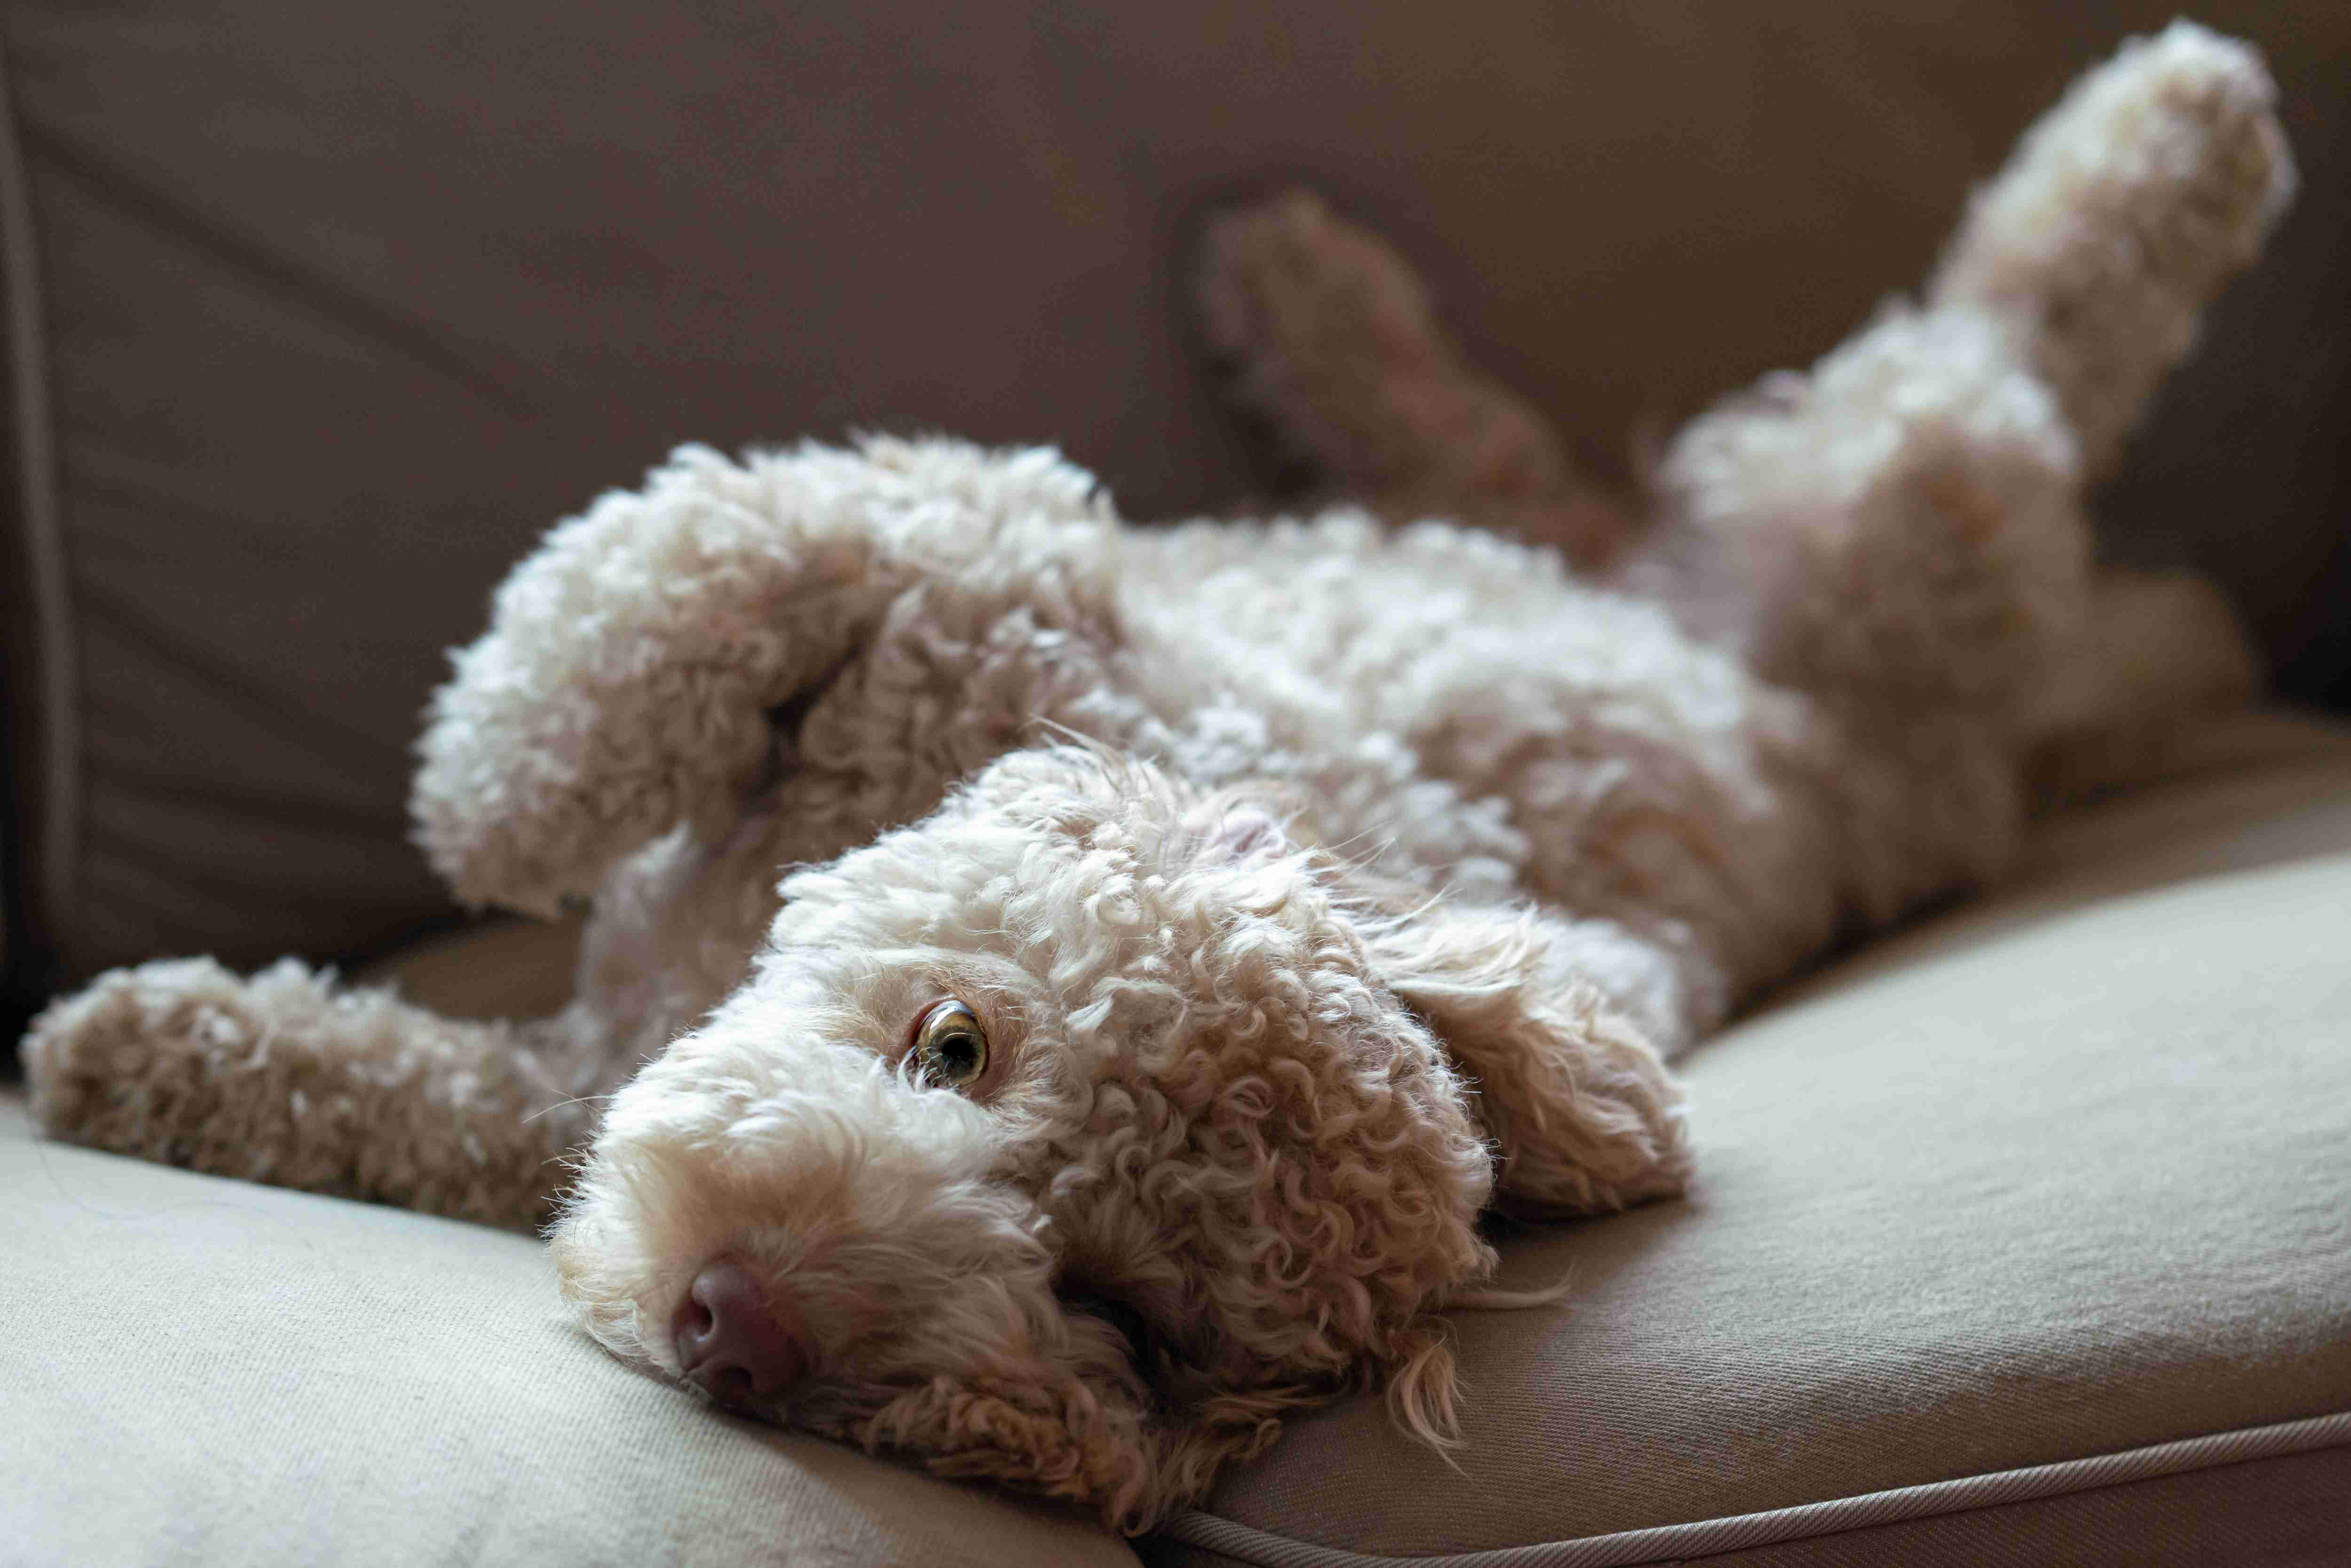 Are Poodles more likely to develop dental problems?